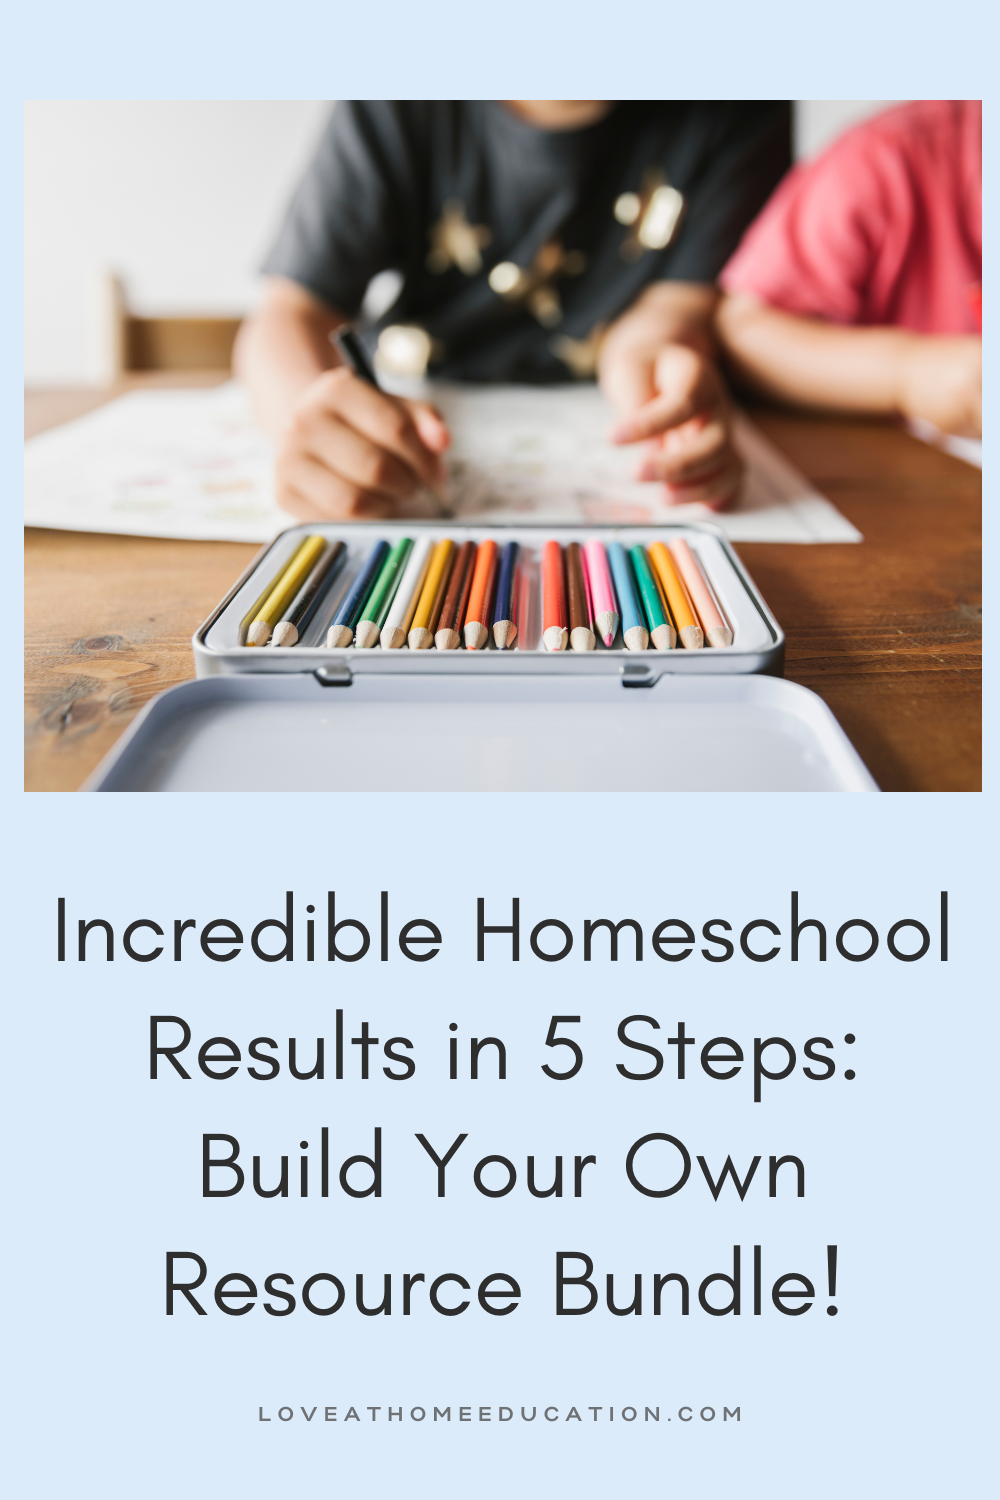 Incredible Homeschool Results in 5 Steps: Build Your Own Resource Bundle!